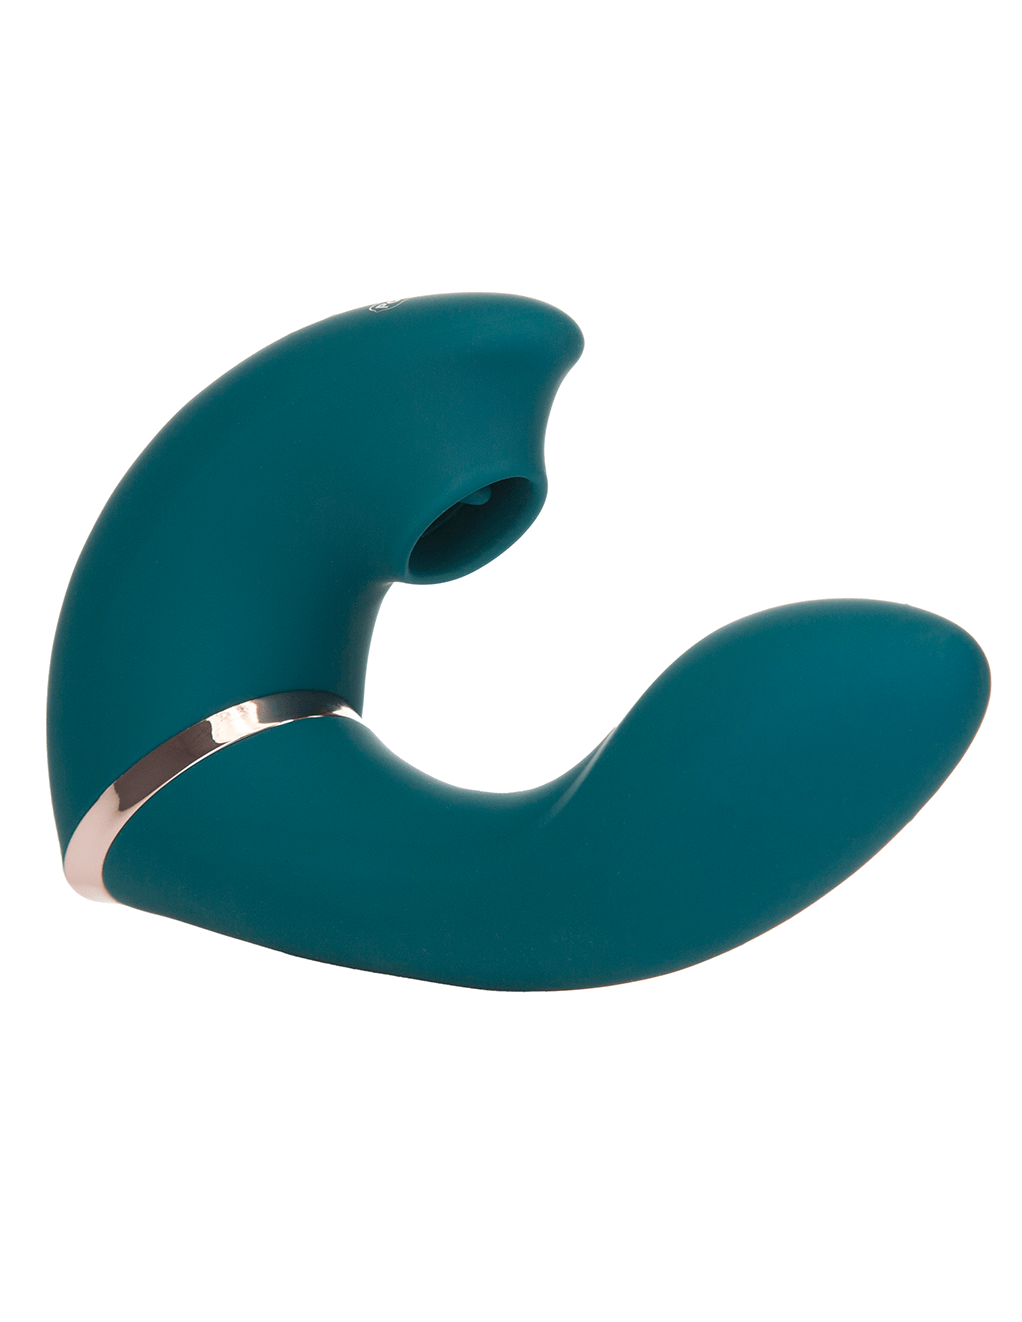 The Monarch Swan - Teal - Compact